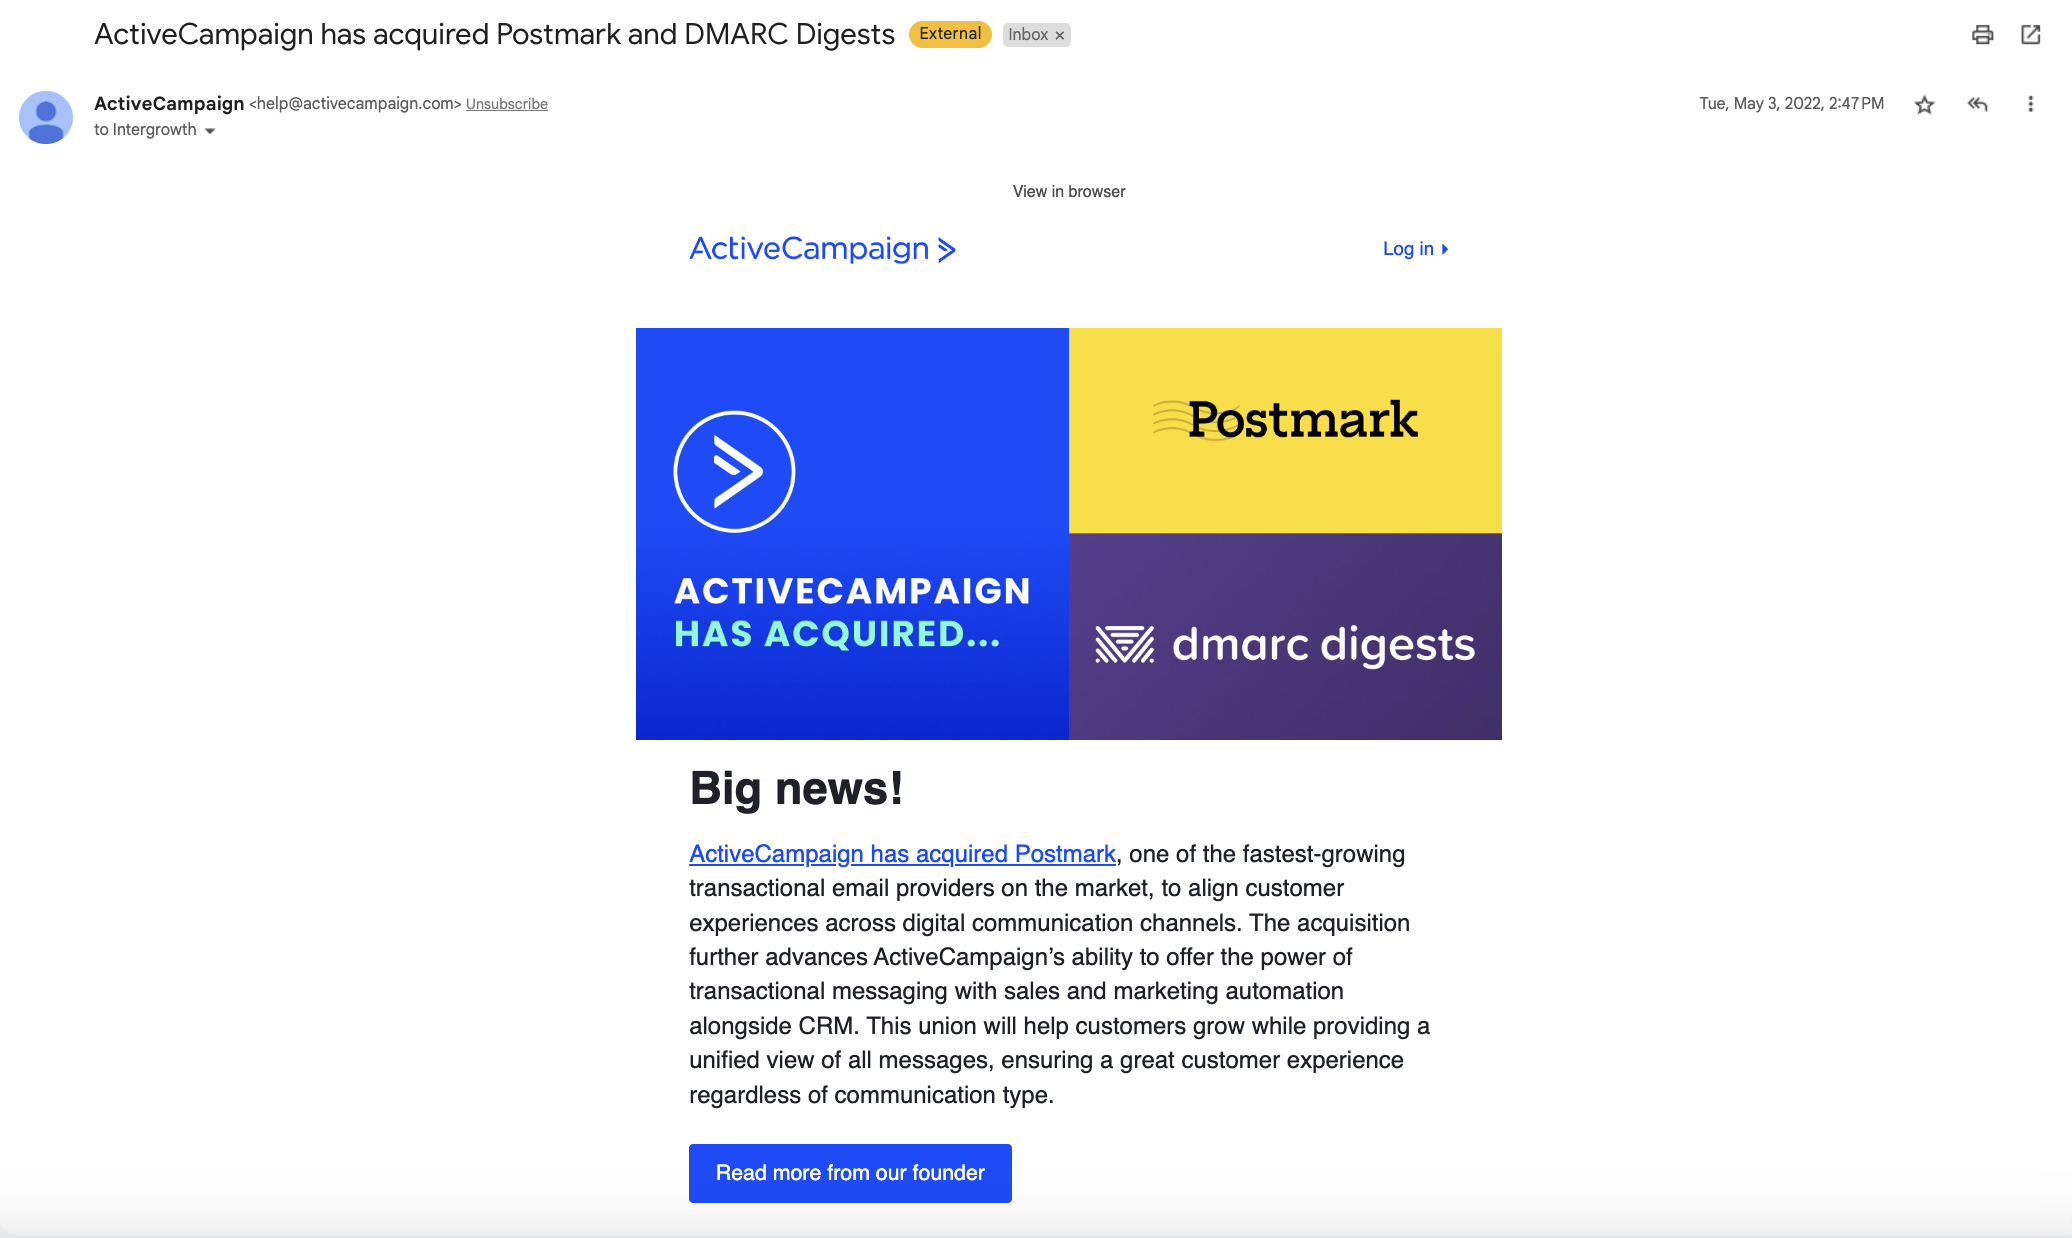 SaaS Company Acquisition Announcement Emails: Screenshot of ActiveCampaign's announcement email when they acquired Postmark